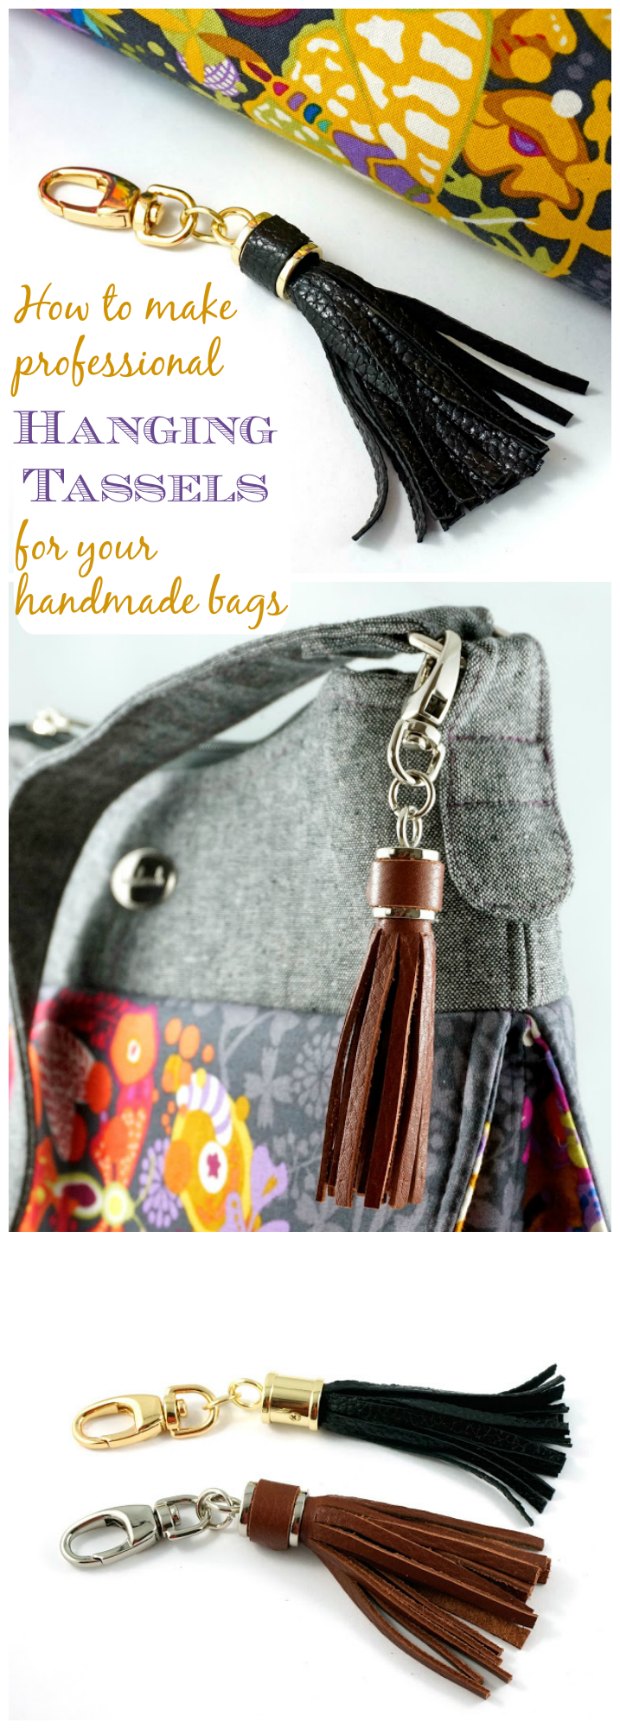 How to make tassels for your handmade bags.  You can also use suede and narrow suede cord for this too.